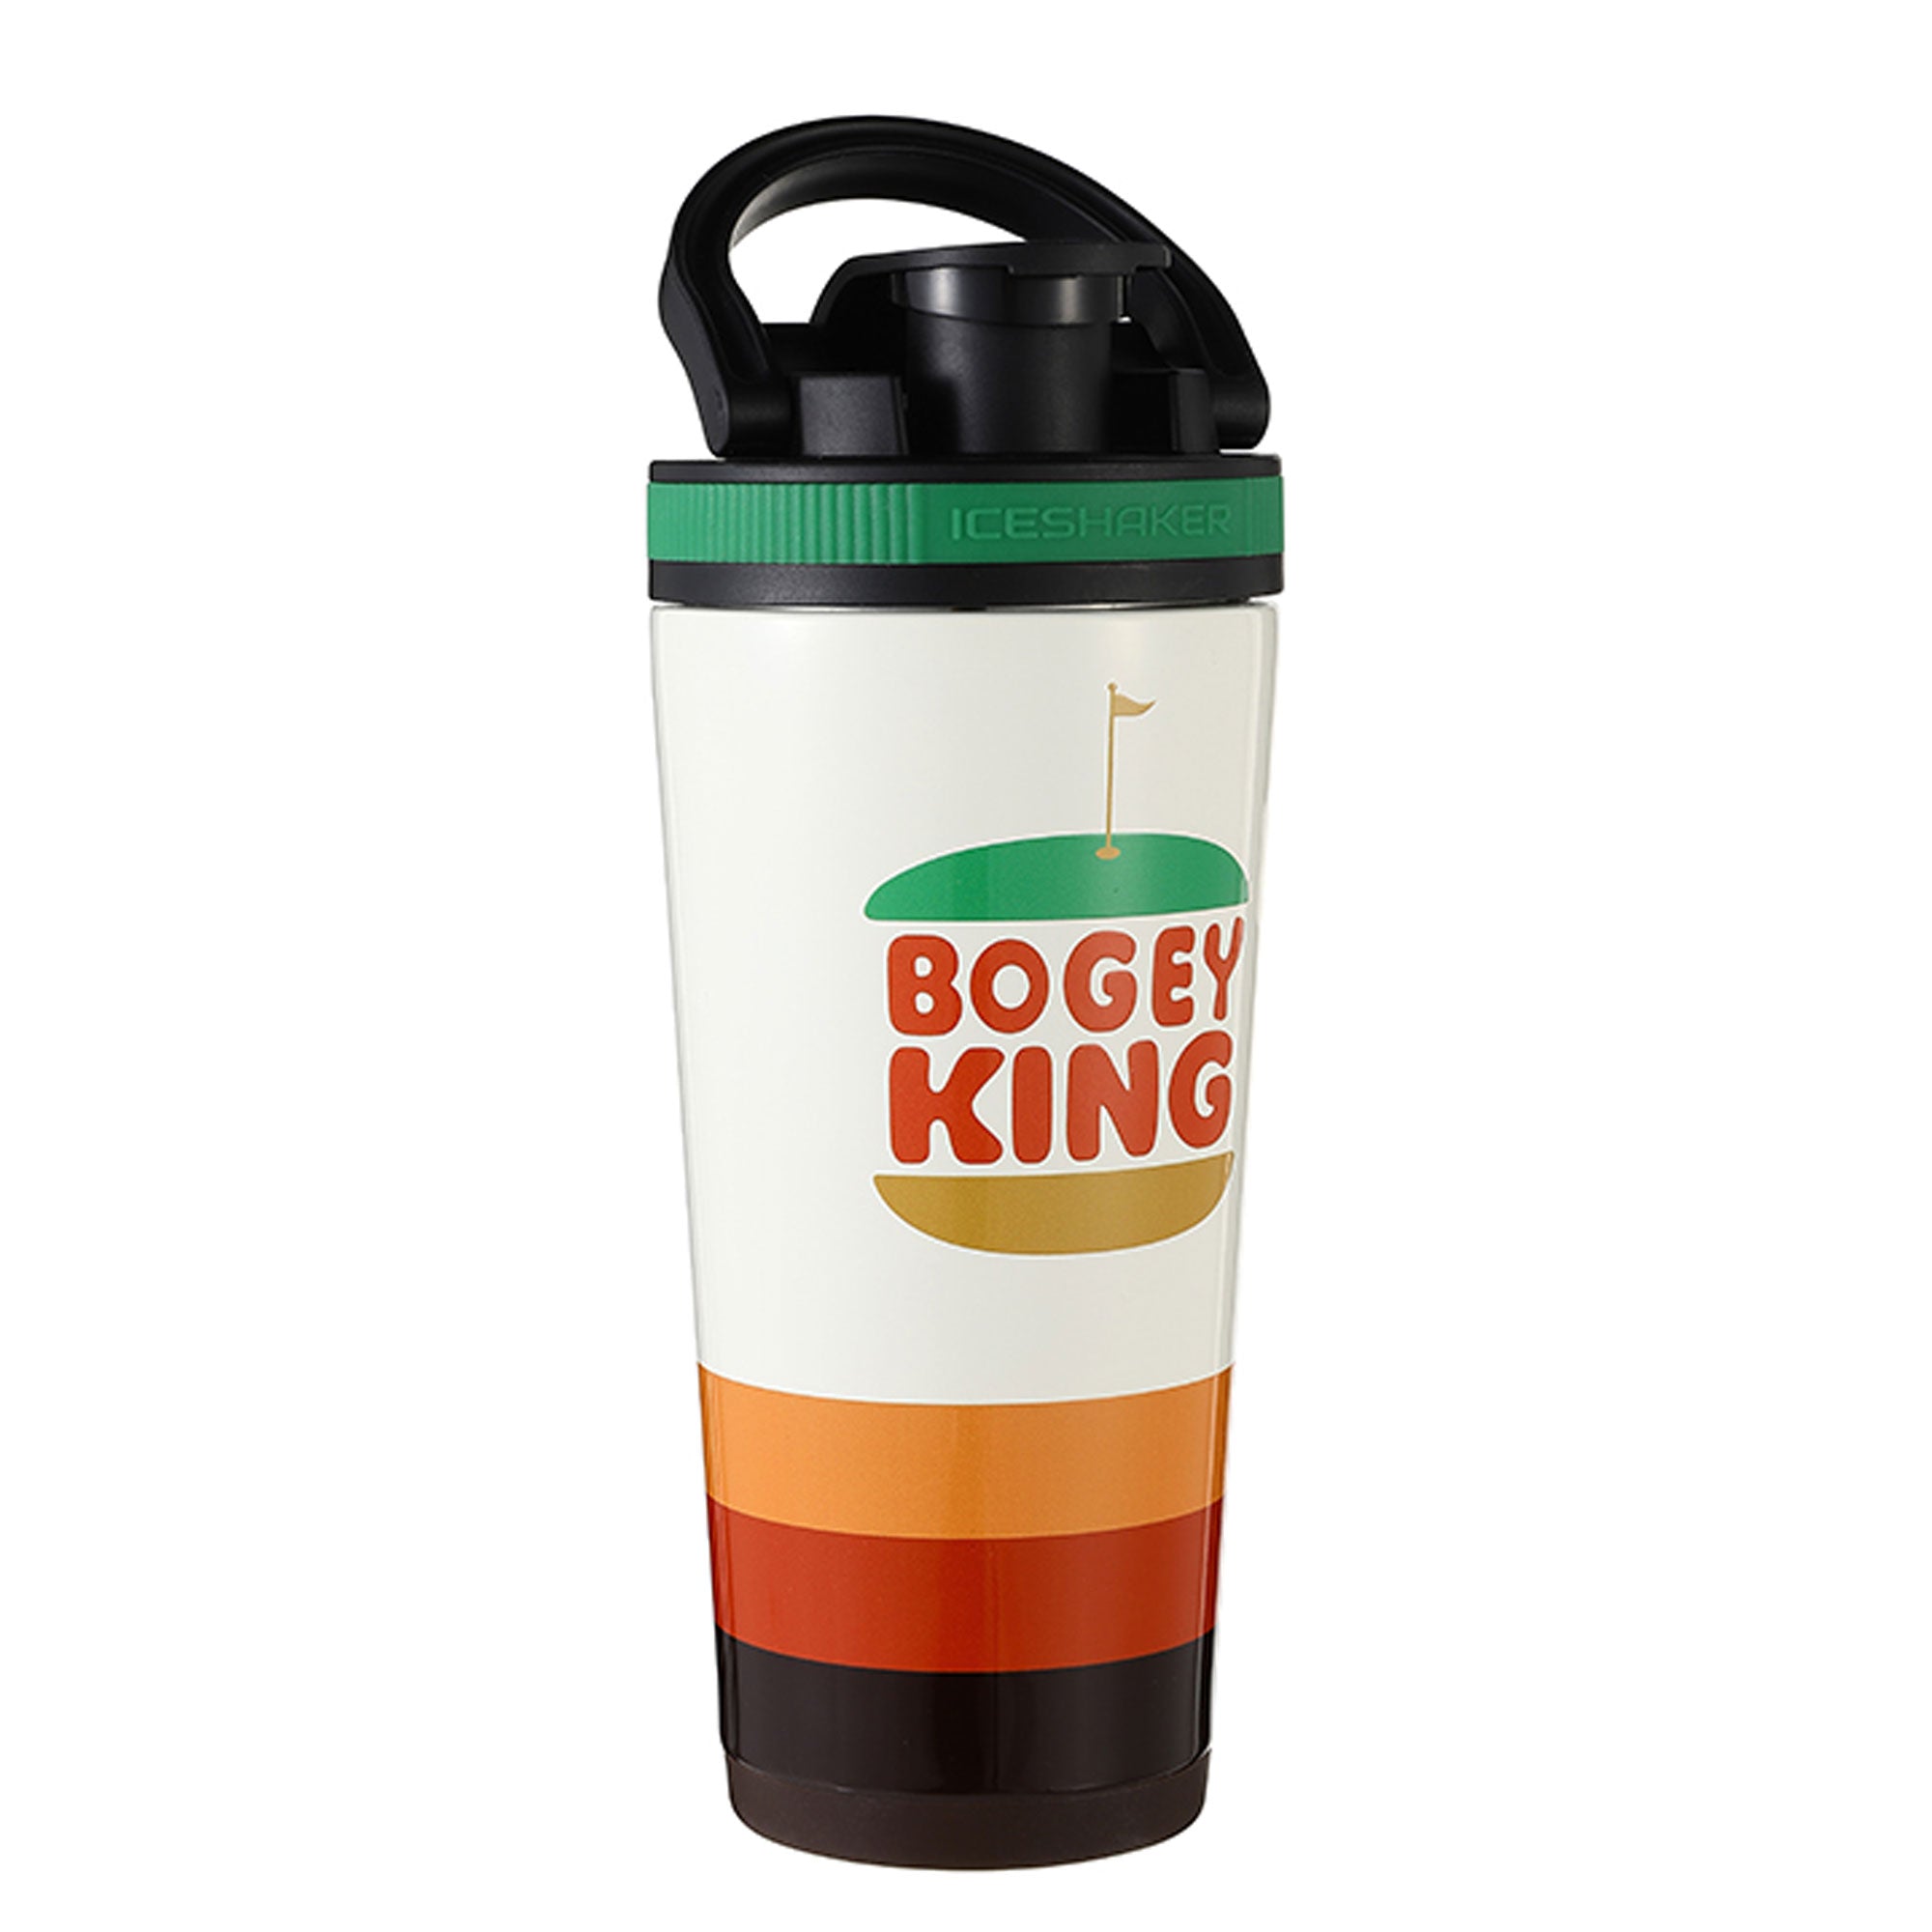 Coffee Cup Shaker 